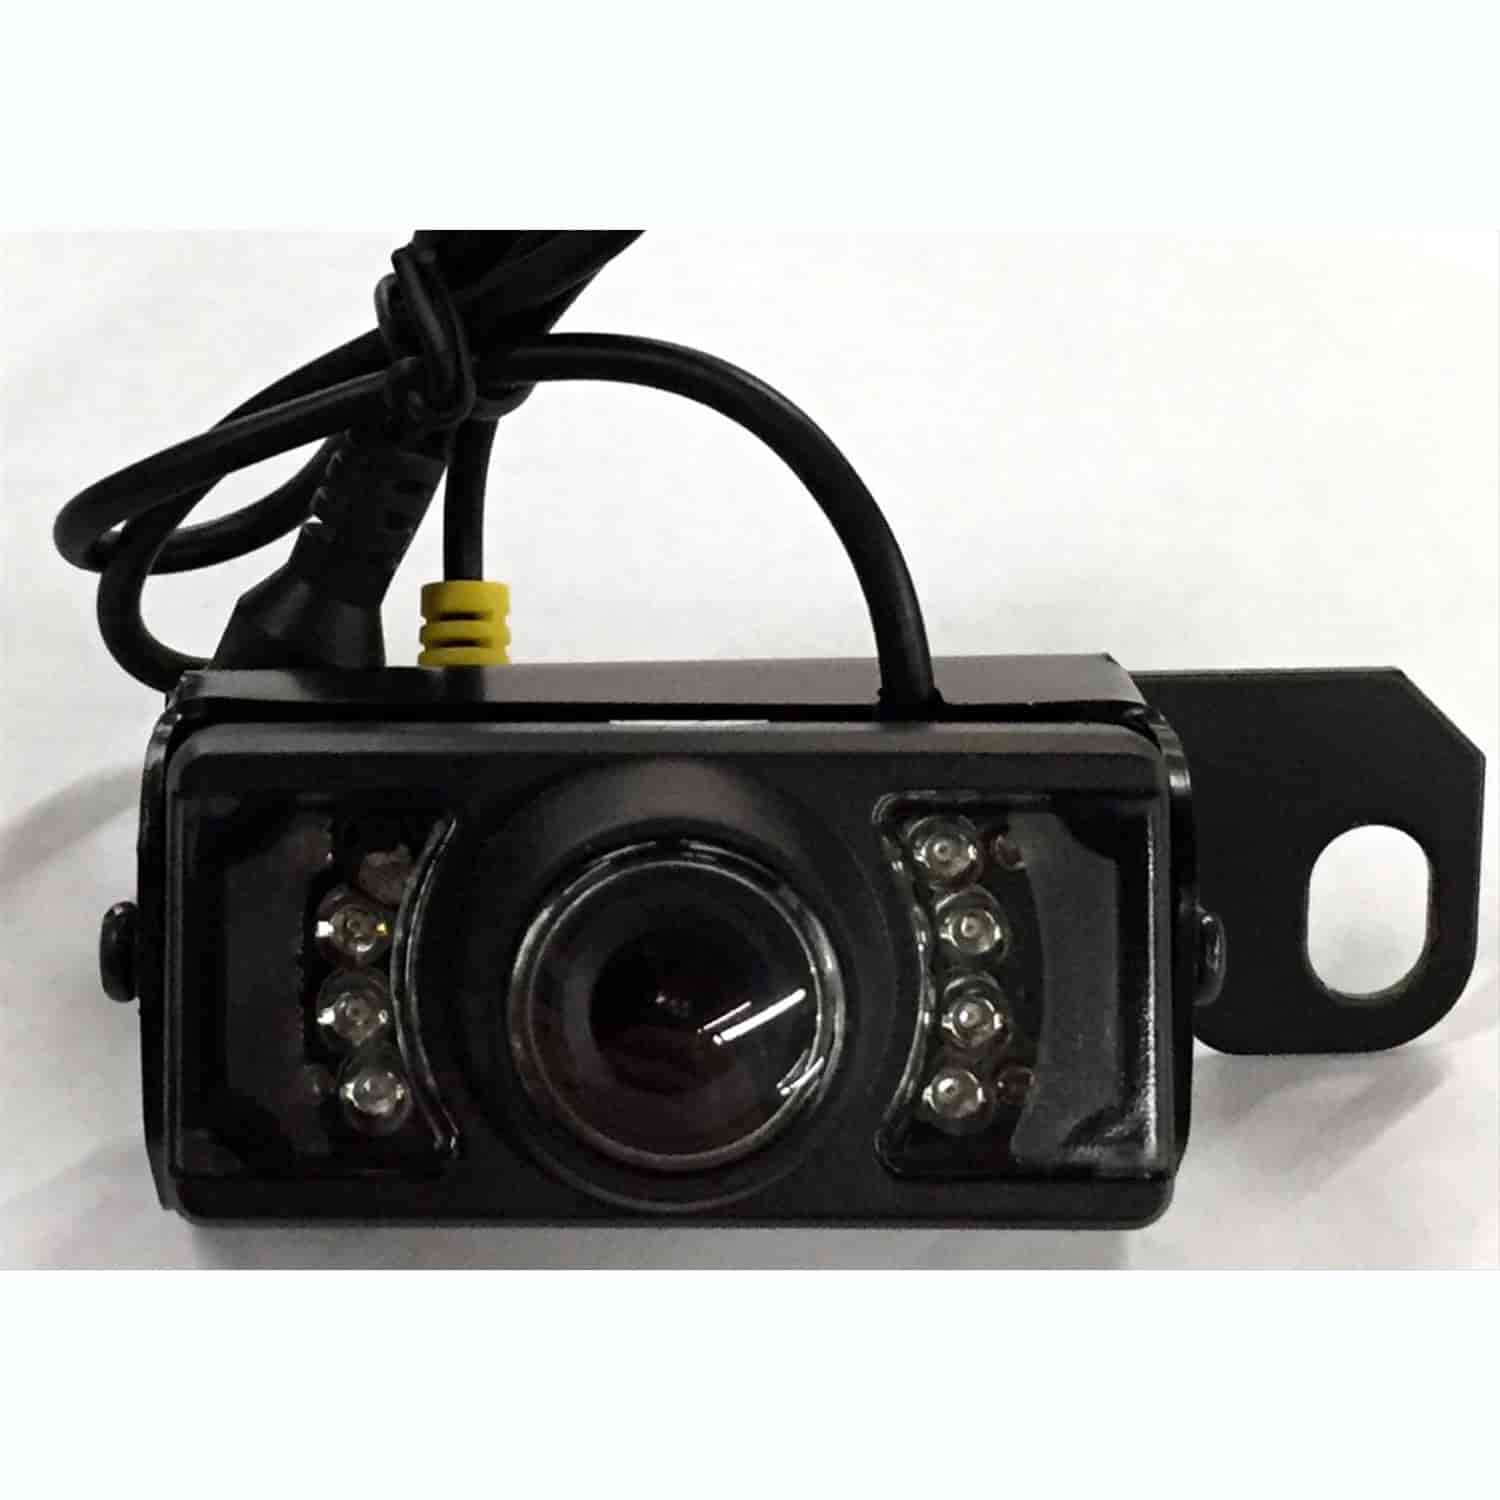 Replacement Back-Up Camera For Vision System camera